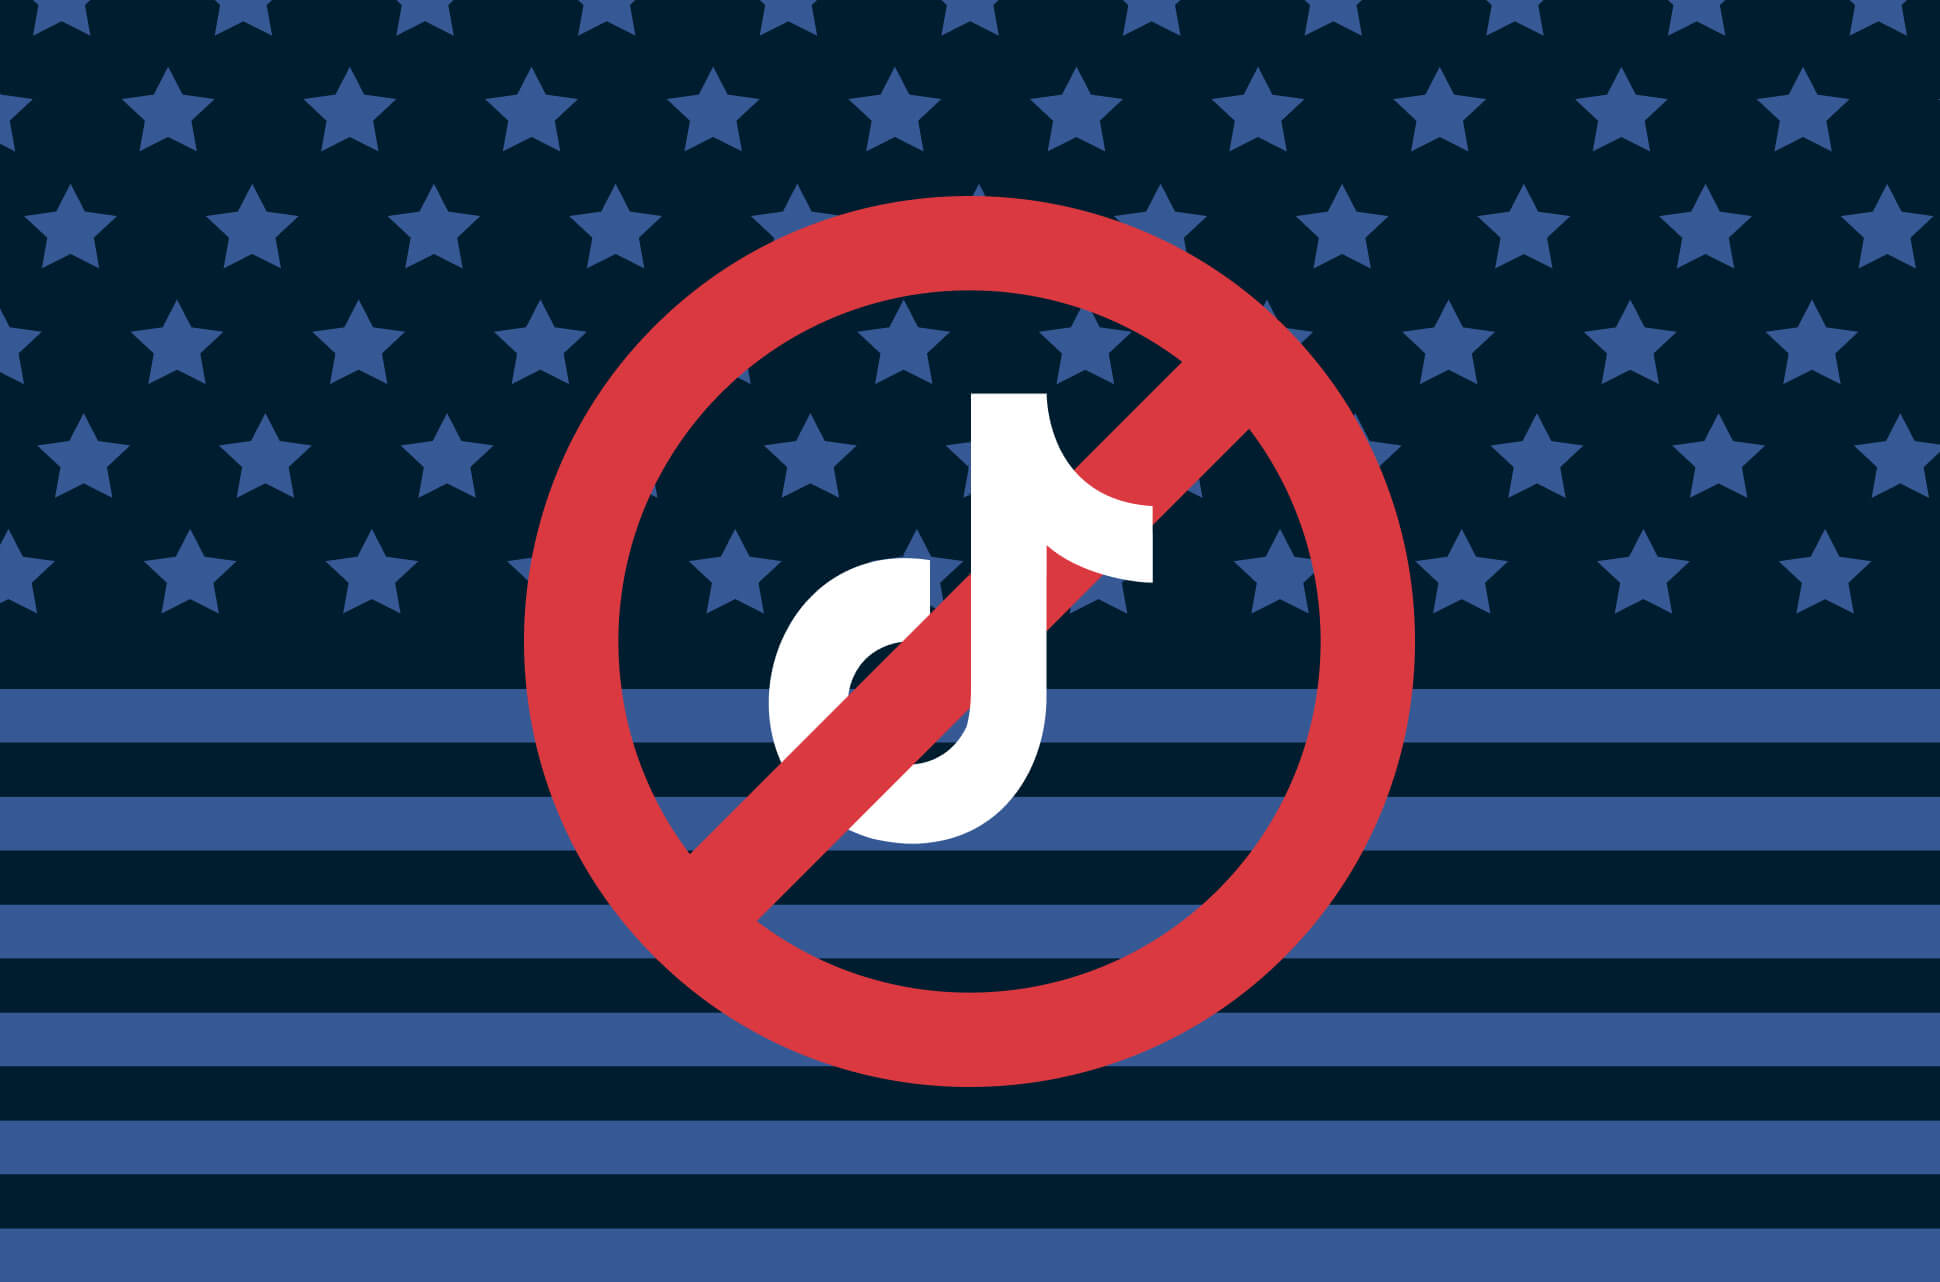 Which countries have banned TikTok and why?